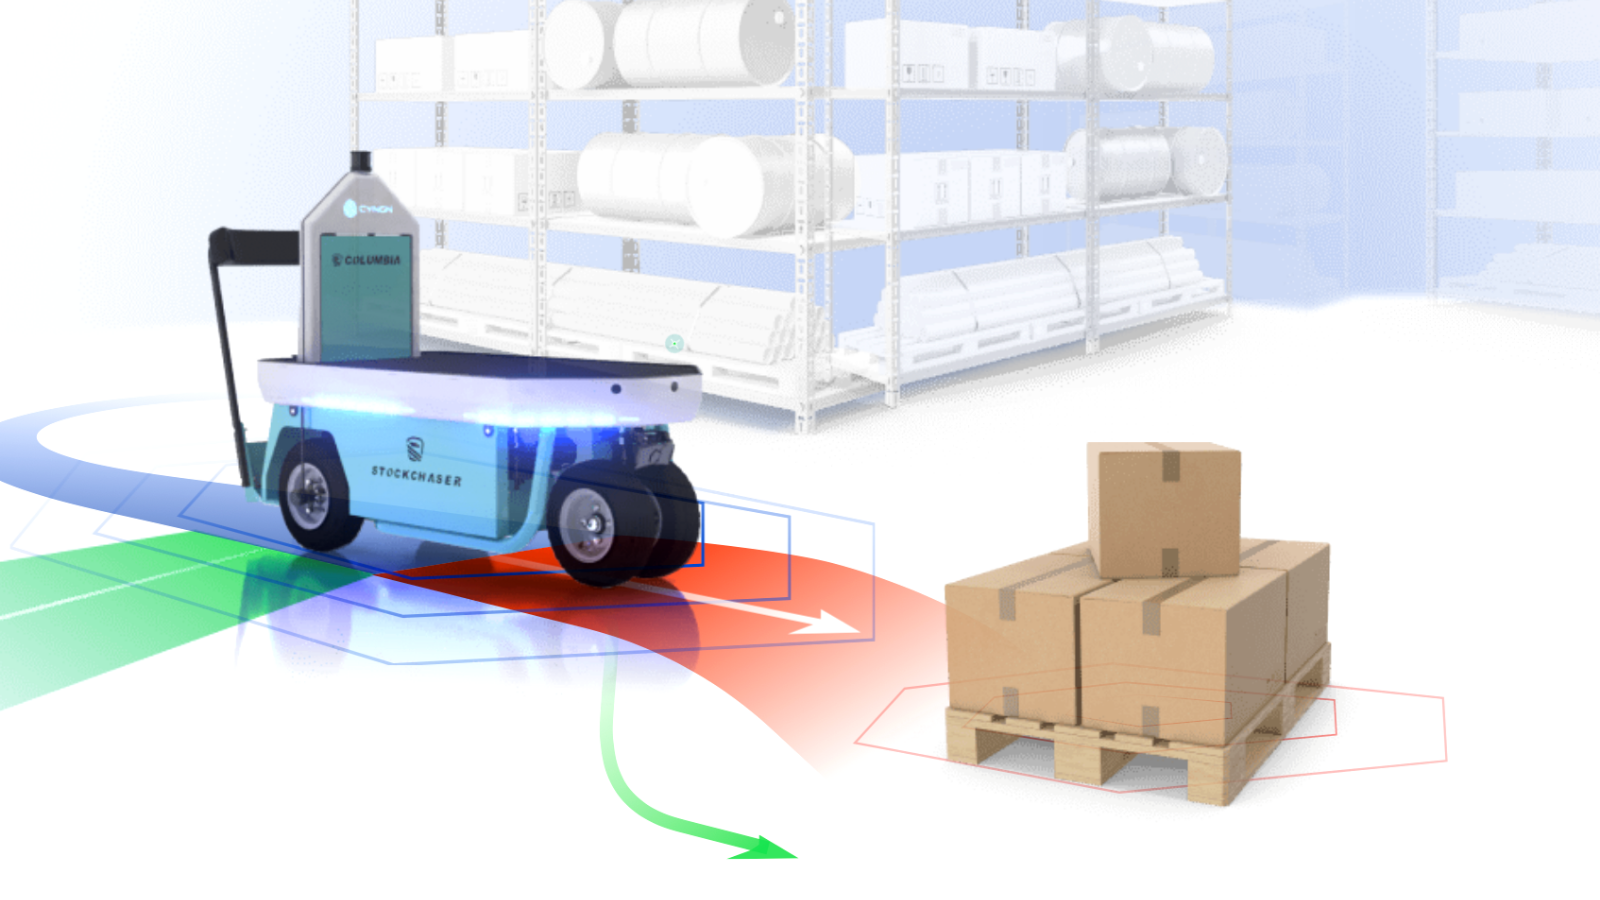 Illustration of an autonomous vehicle operating in the warehouse